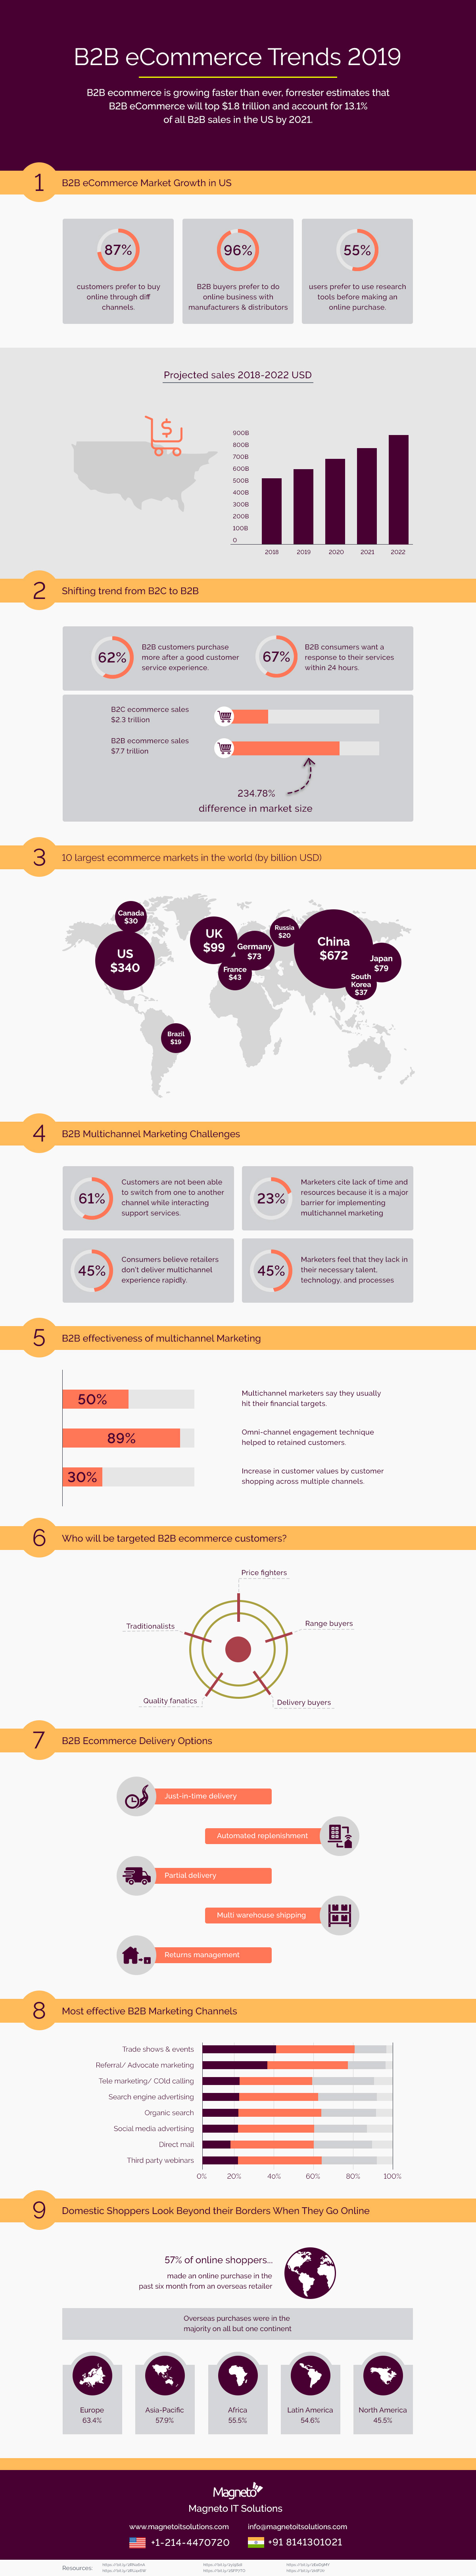 B2B e-Commerce Trends 2020 - Infographic With Statistics (Updated)